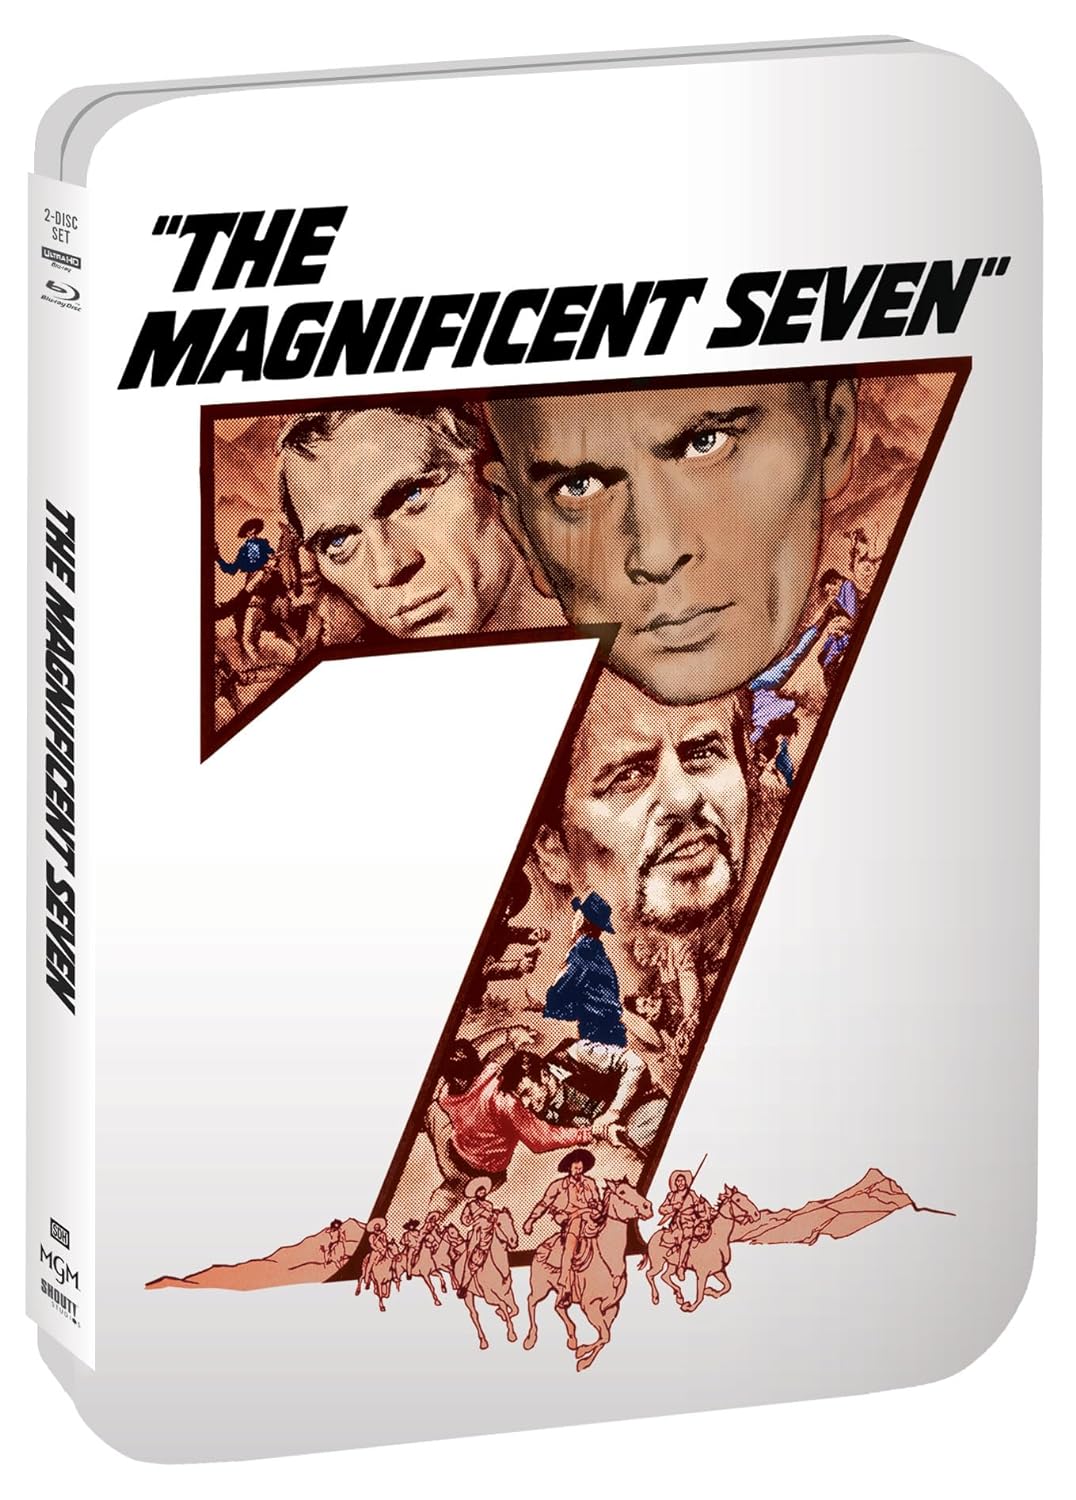 The Magnificent Seven (1960) 4K UHD + Blu-ray Limited Edition SteelBook (Shout Factory)